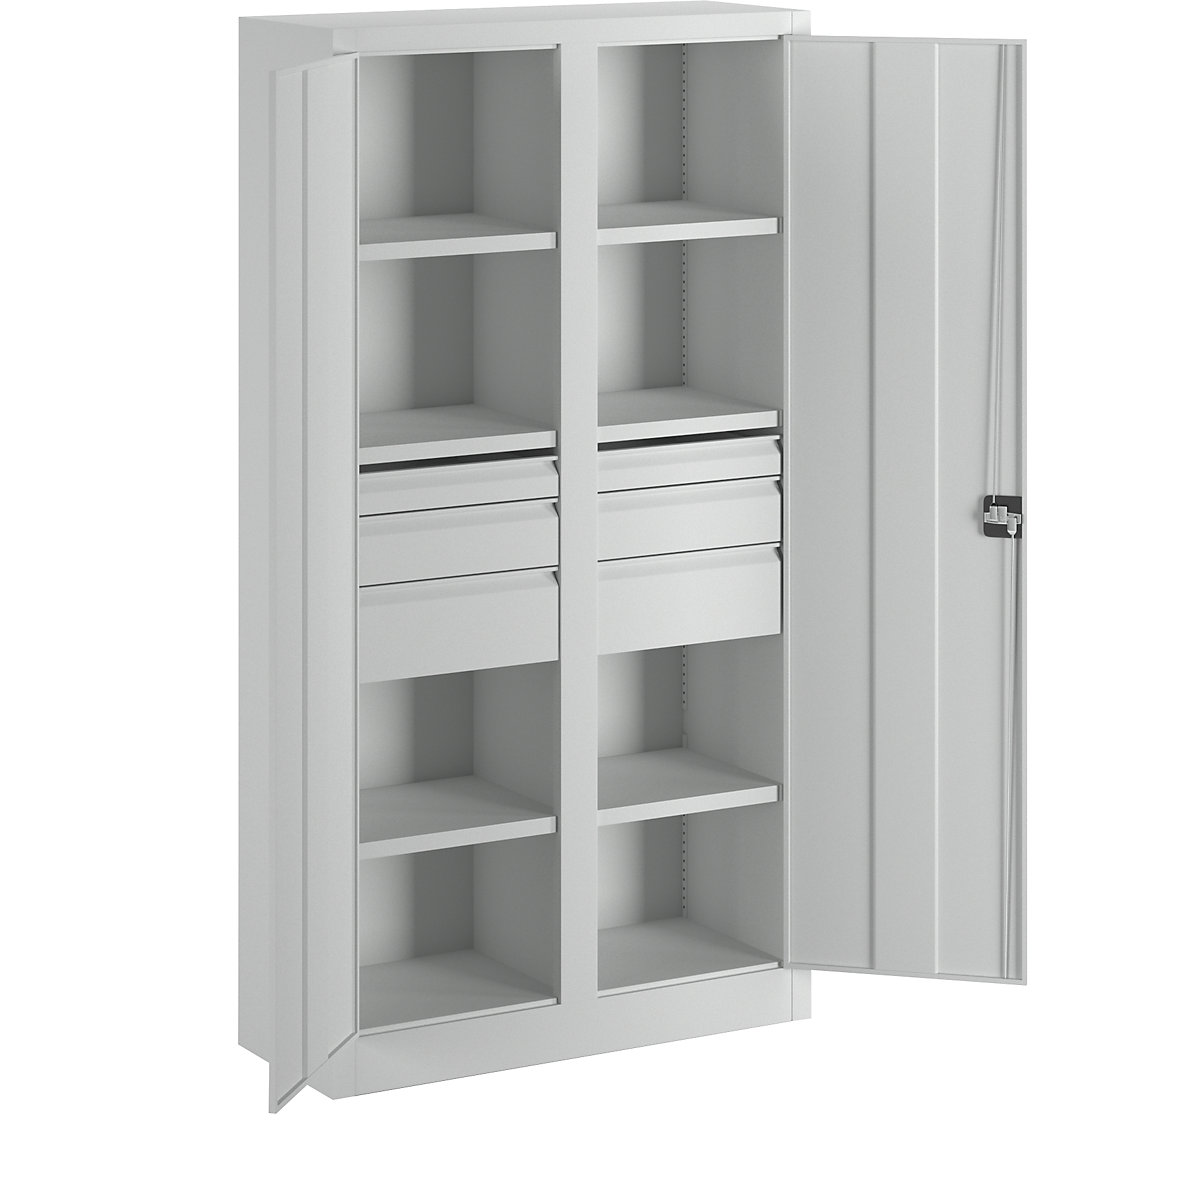 Heavy duty cupboard, height 1950 mm – Pavoy, 6 shelves, 6 drawers, grey-2